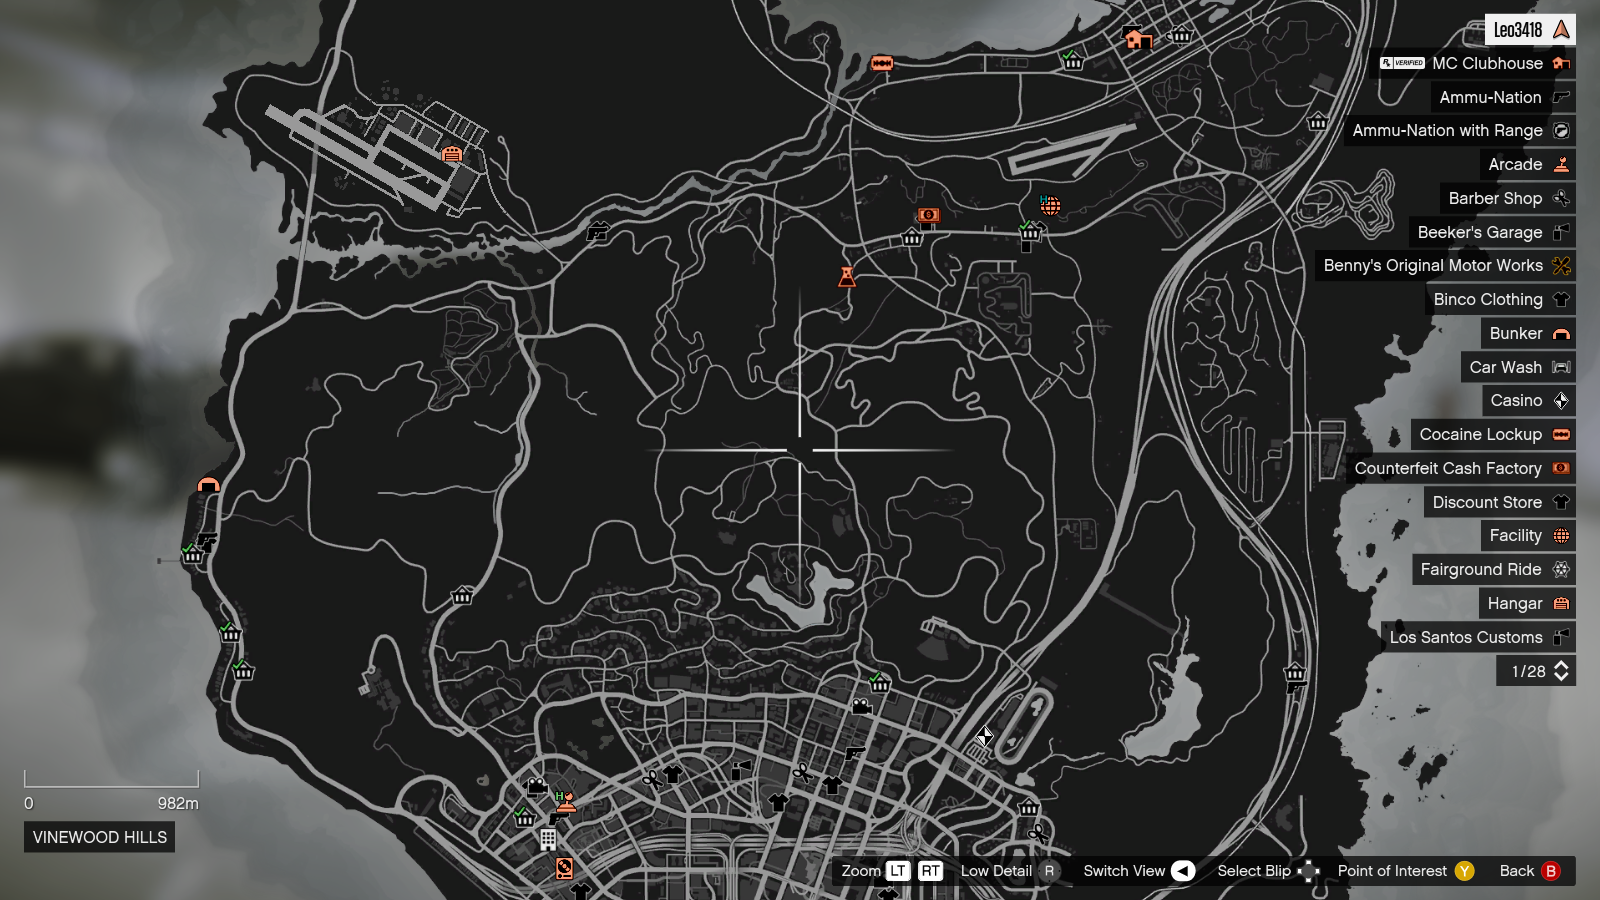 First character’s properties in Blaine County